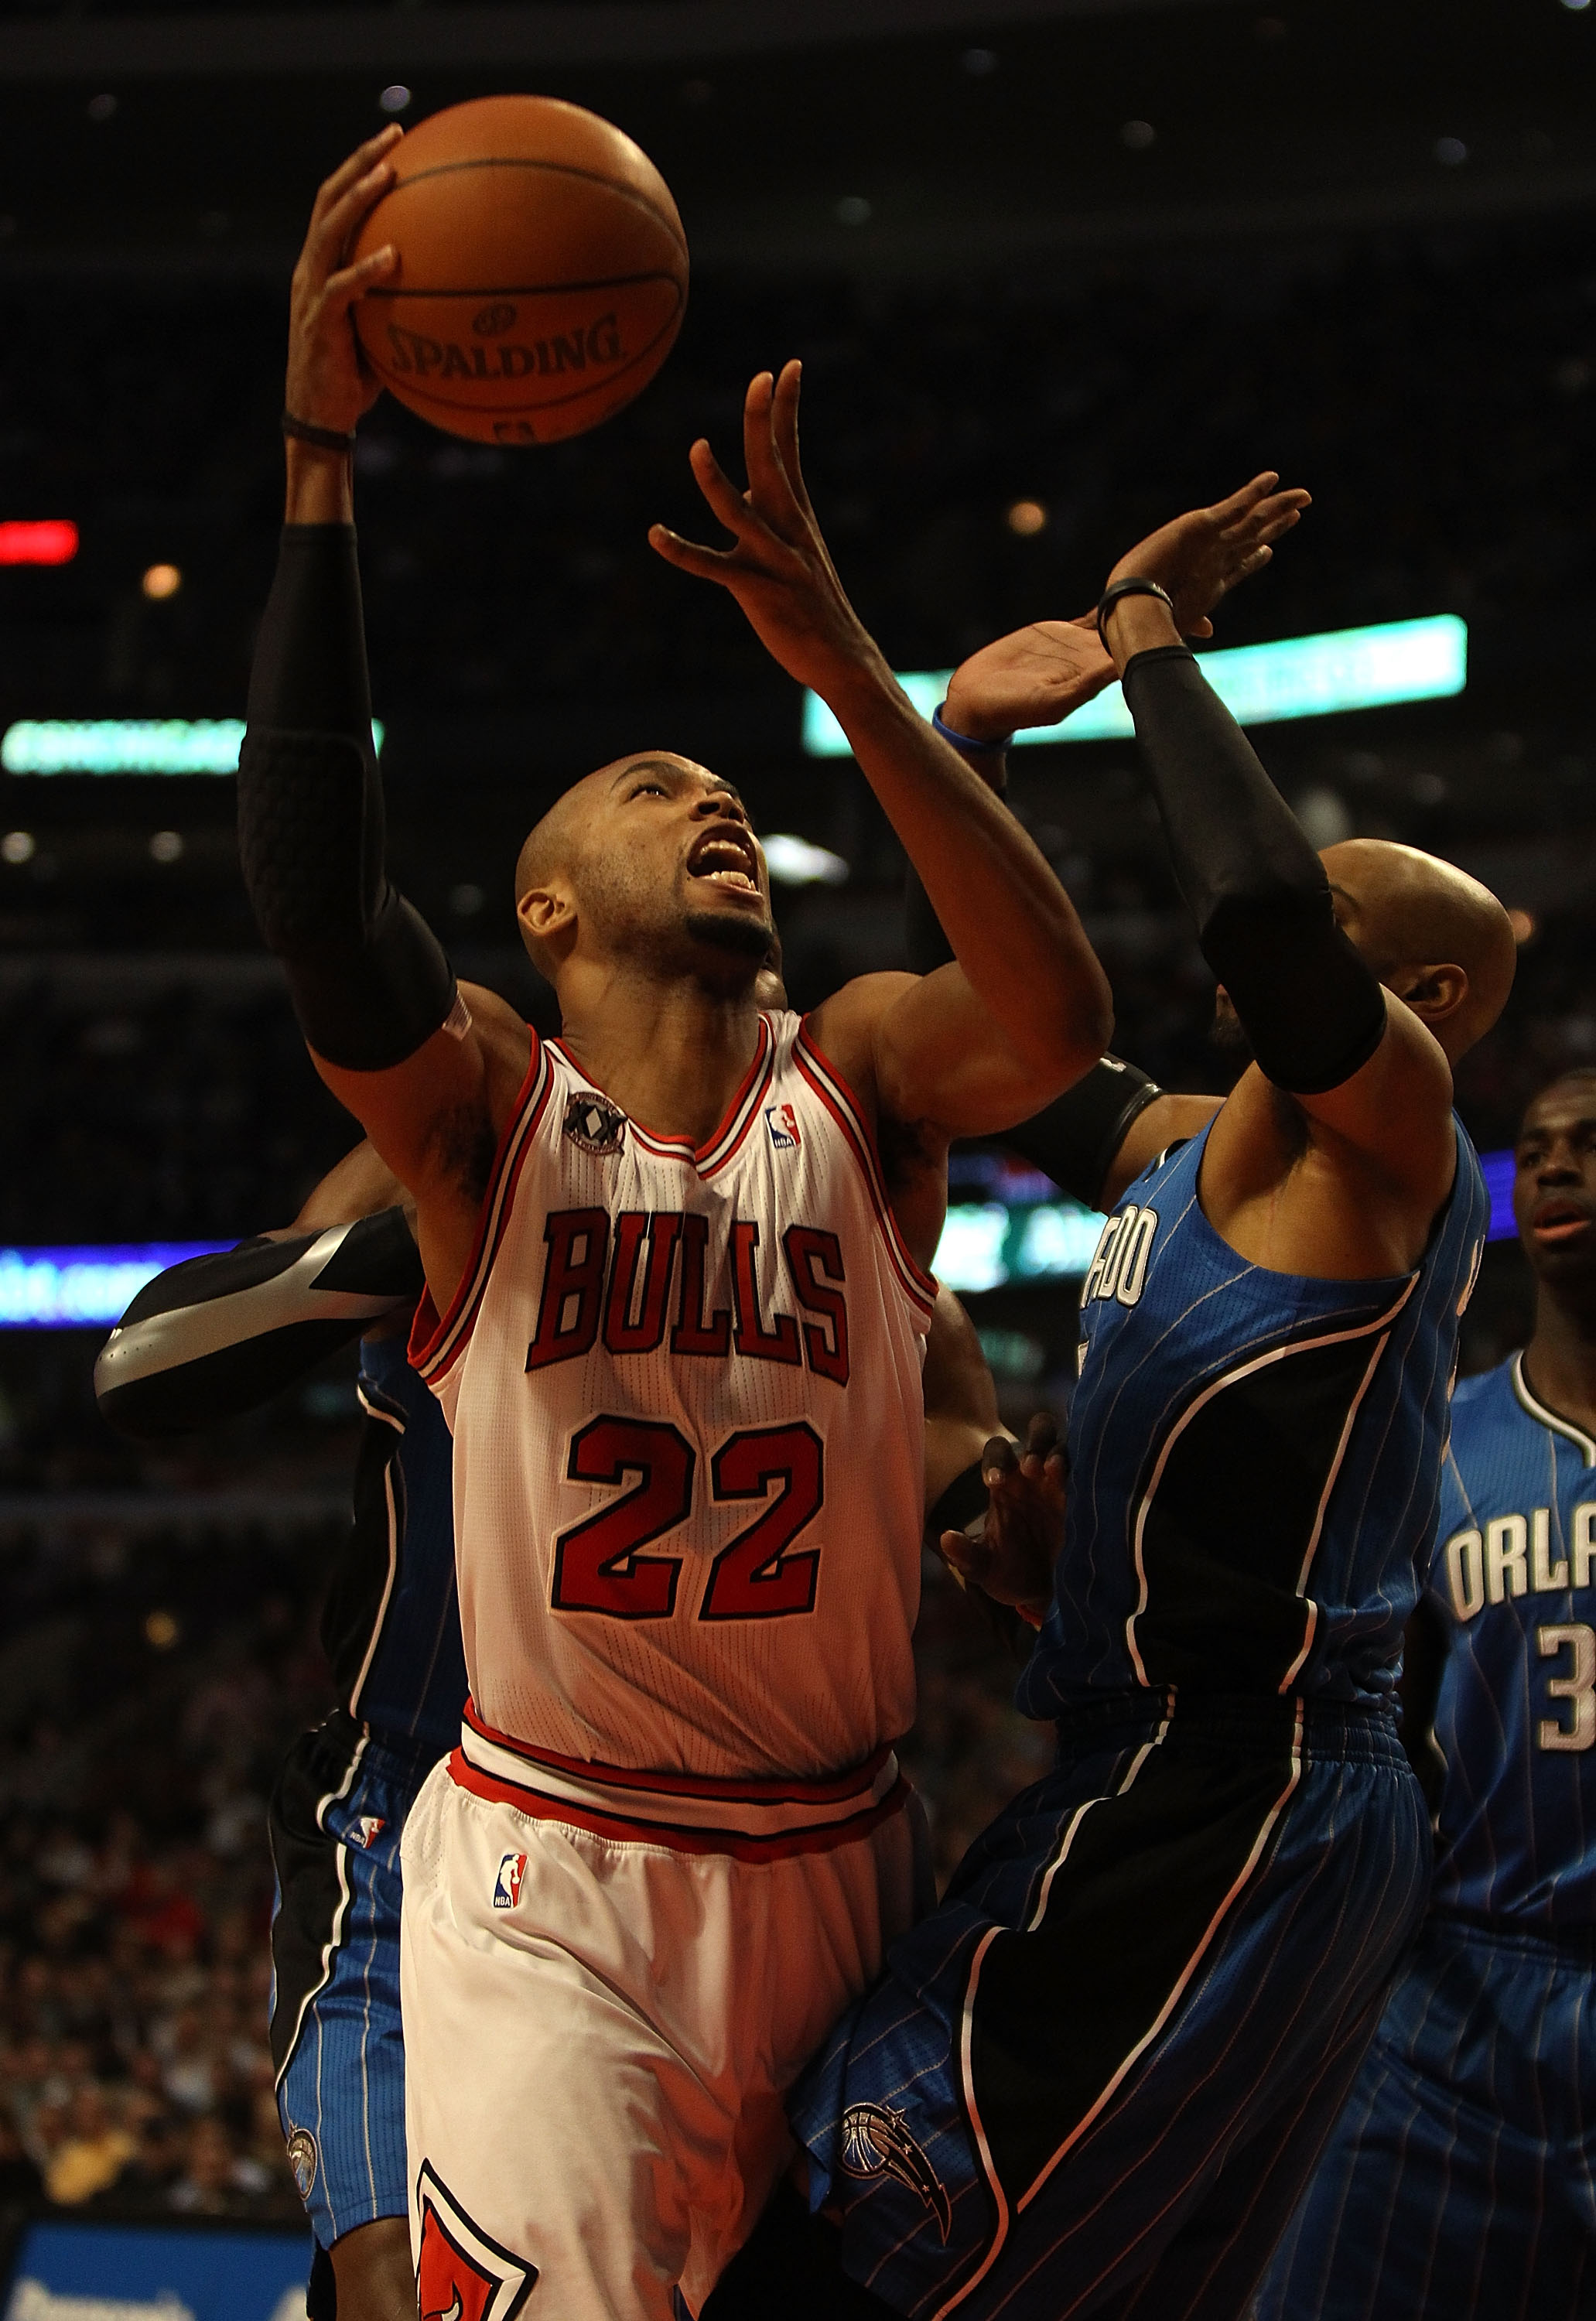 CHICAGO, IL - DECEMBER 01: Taj Gibson #22 of the Chicago Bulls puts up a shot over Vince Carter #15 of the Orlando Magic at the United Center on December 1, 2010 in Chicago, Illinois. NOTE TO USER: User expressly acknowledges and agrees that, by downloadi